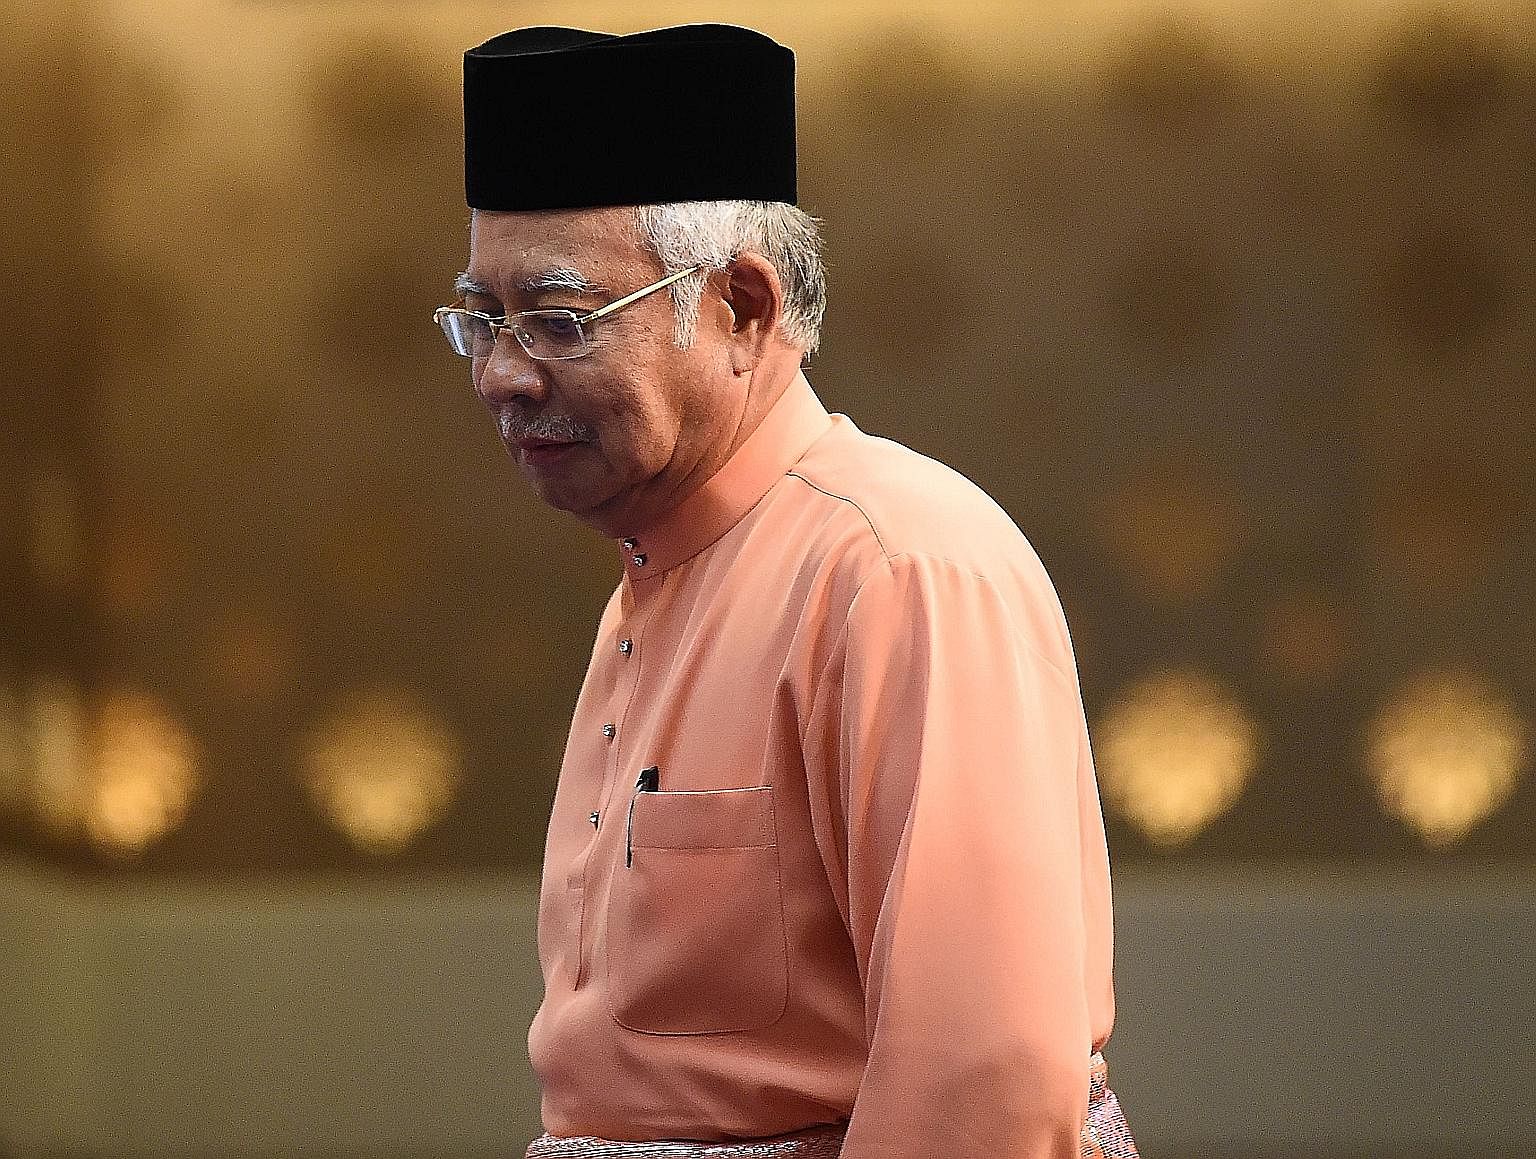 Mr Najib continues to dismiss the allegations brought against him.